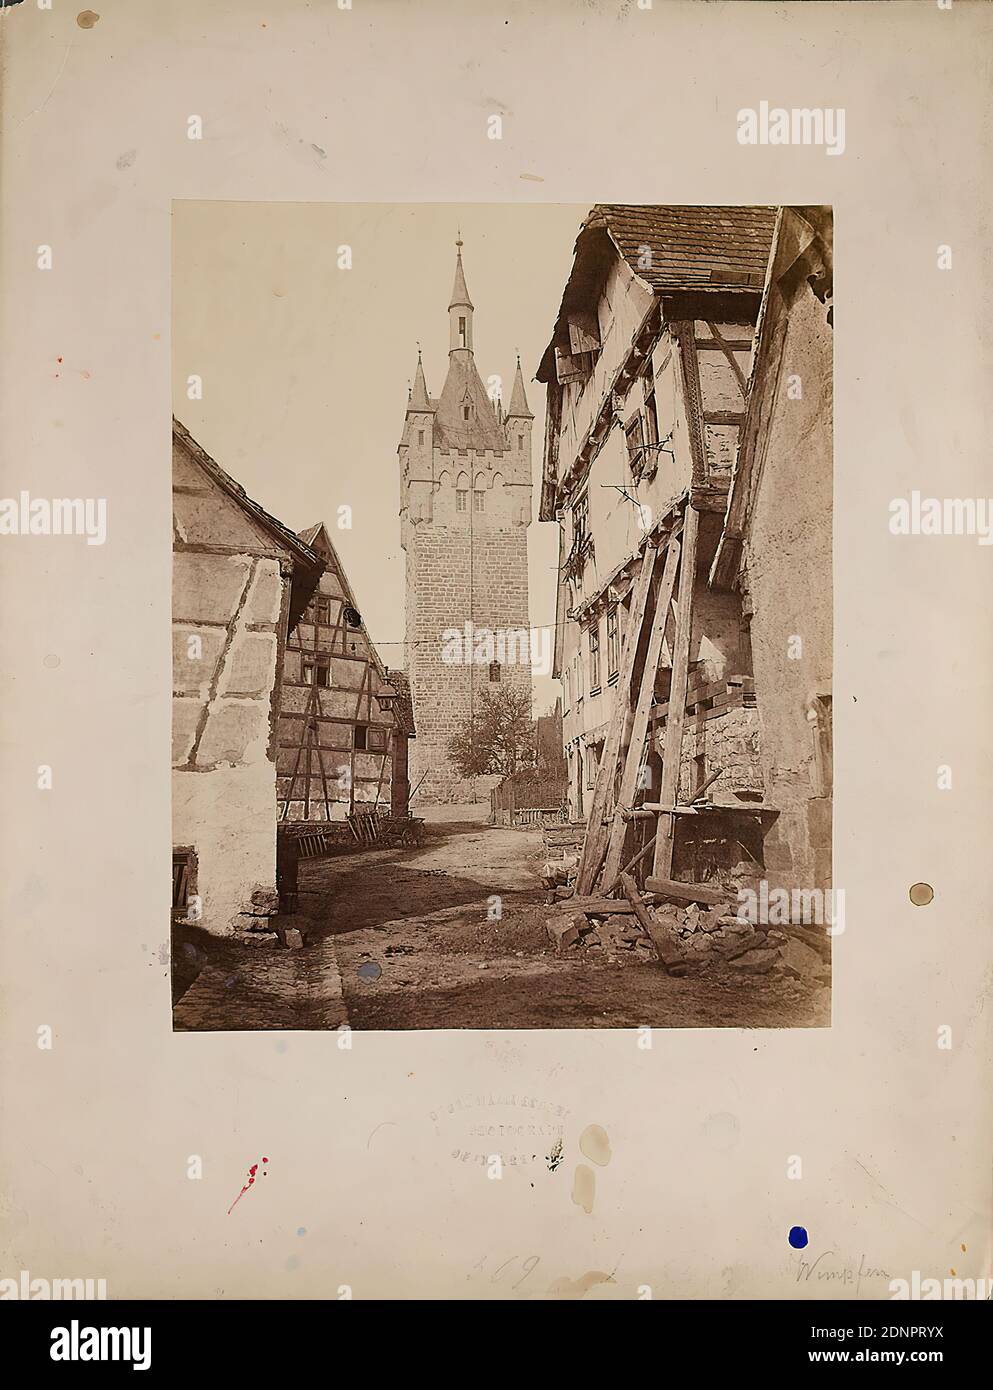 Georg Maria Eckert, Blue Tower in Wimpfen am Berg, albumin paper, black and white positive process, image size: height: 26.00 cm; width: 20.80 cm, inscribed: Cardboard recto lower right: handwritten in lead 369 Wimpfen, dry stamp: cardboard recto and center: GEORG MARIA ECKERT HOF PHOTOGRAPH HEIDELBERG, architectural photography, architecture, tower, castle, palace Stock Photo